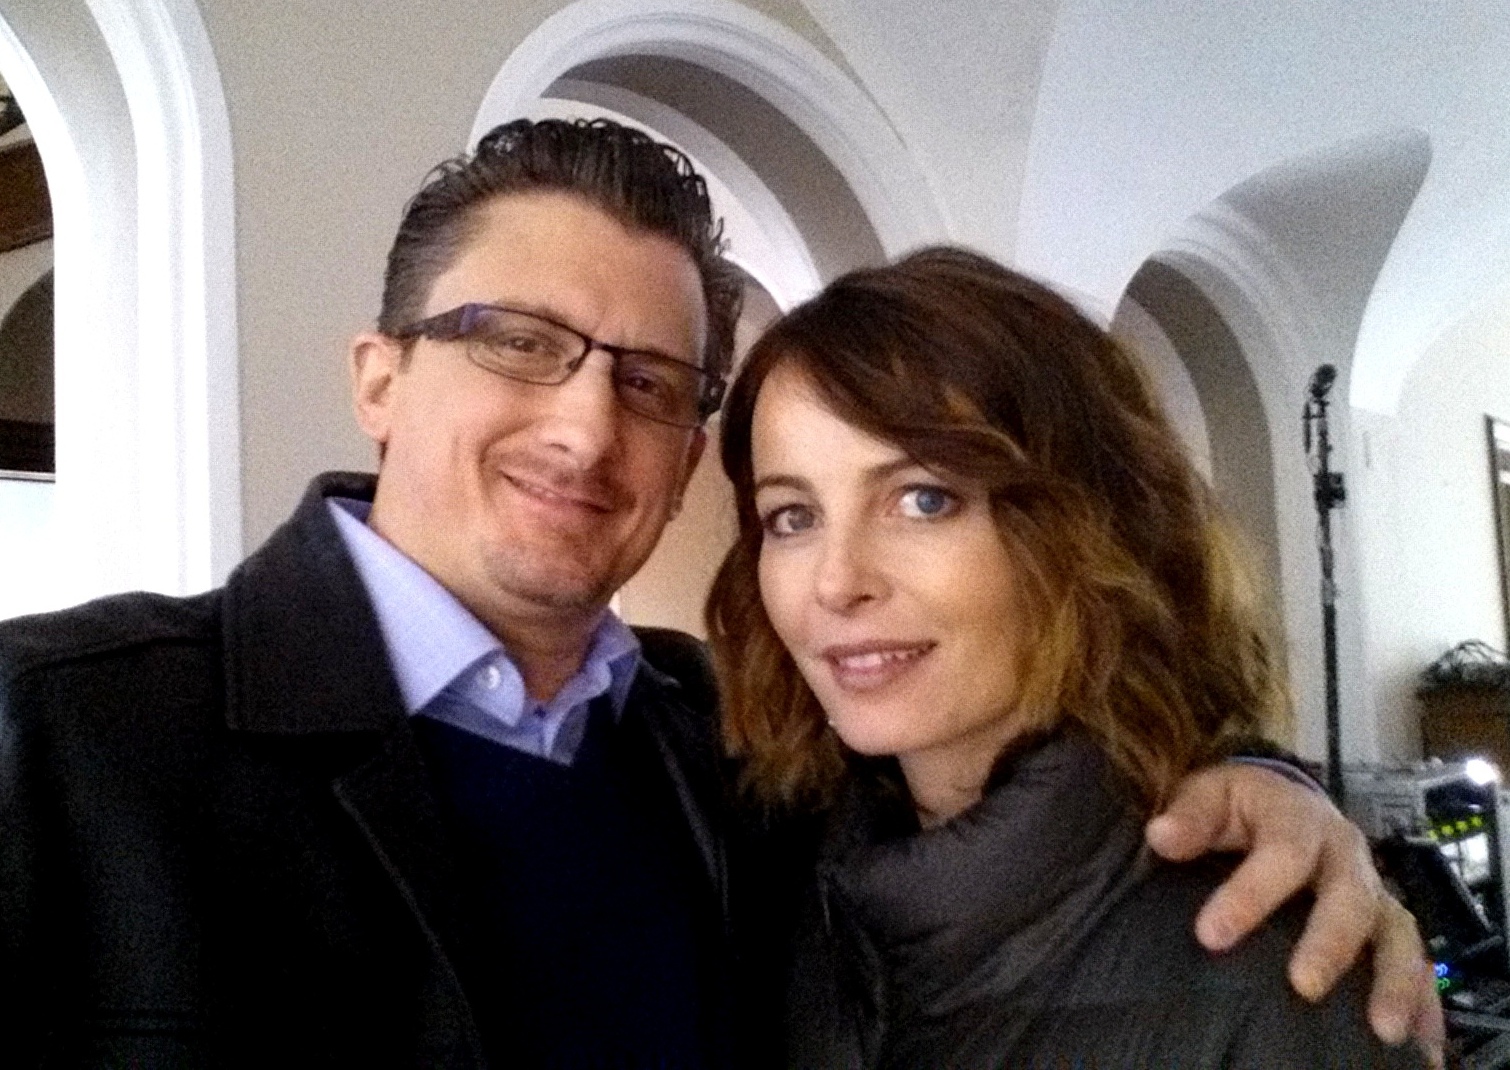 On set in Prague with Violante Placido shooting Transporter: the series